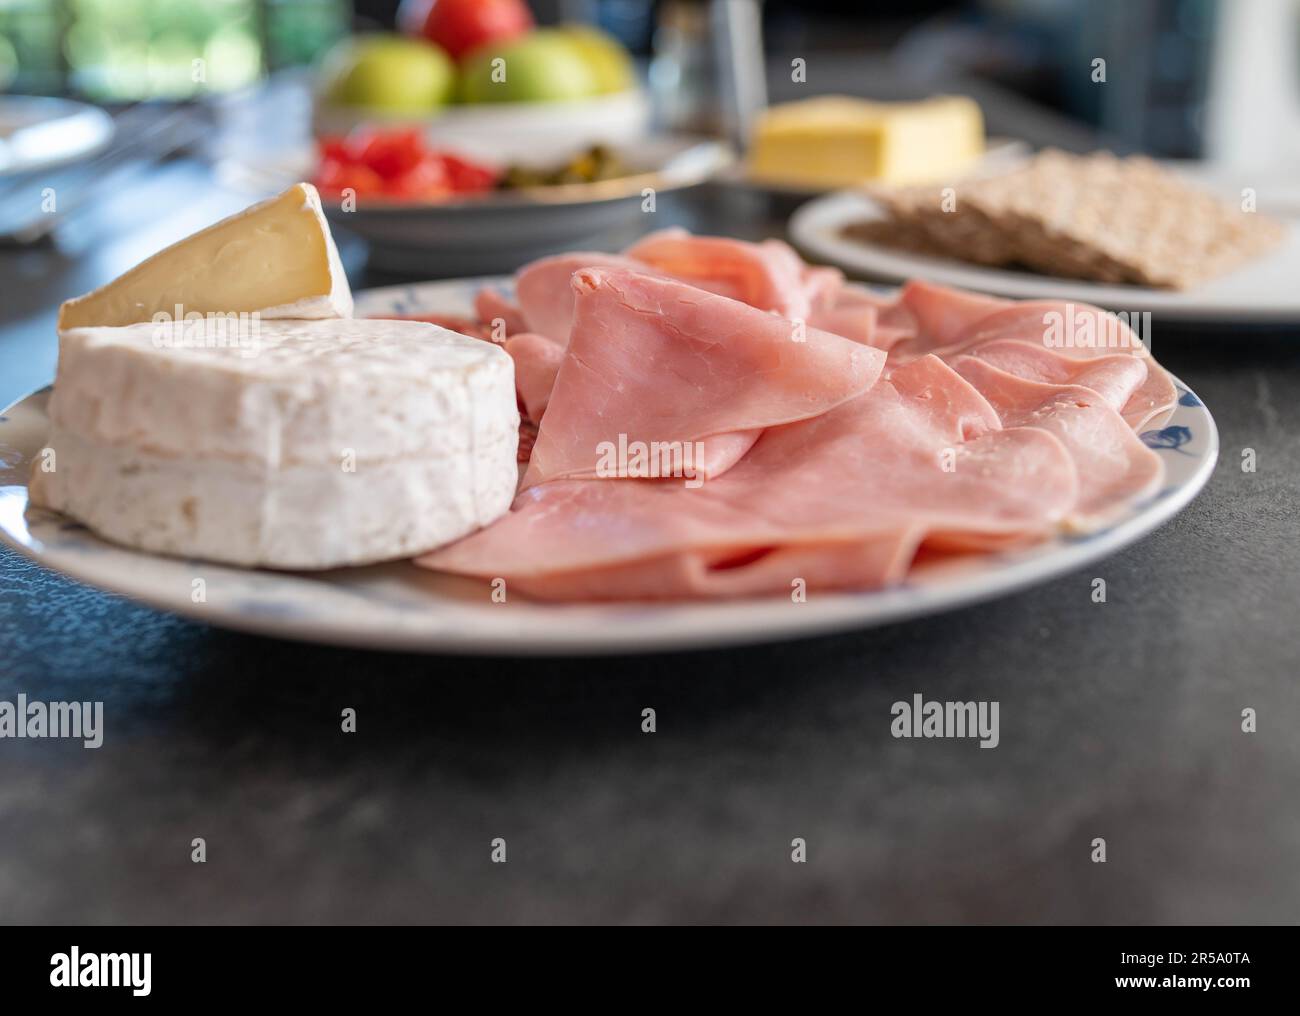 Plate with cold cuts and cheese on a dinner table Stock Photo